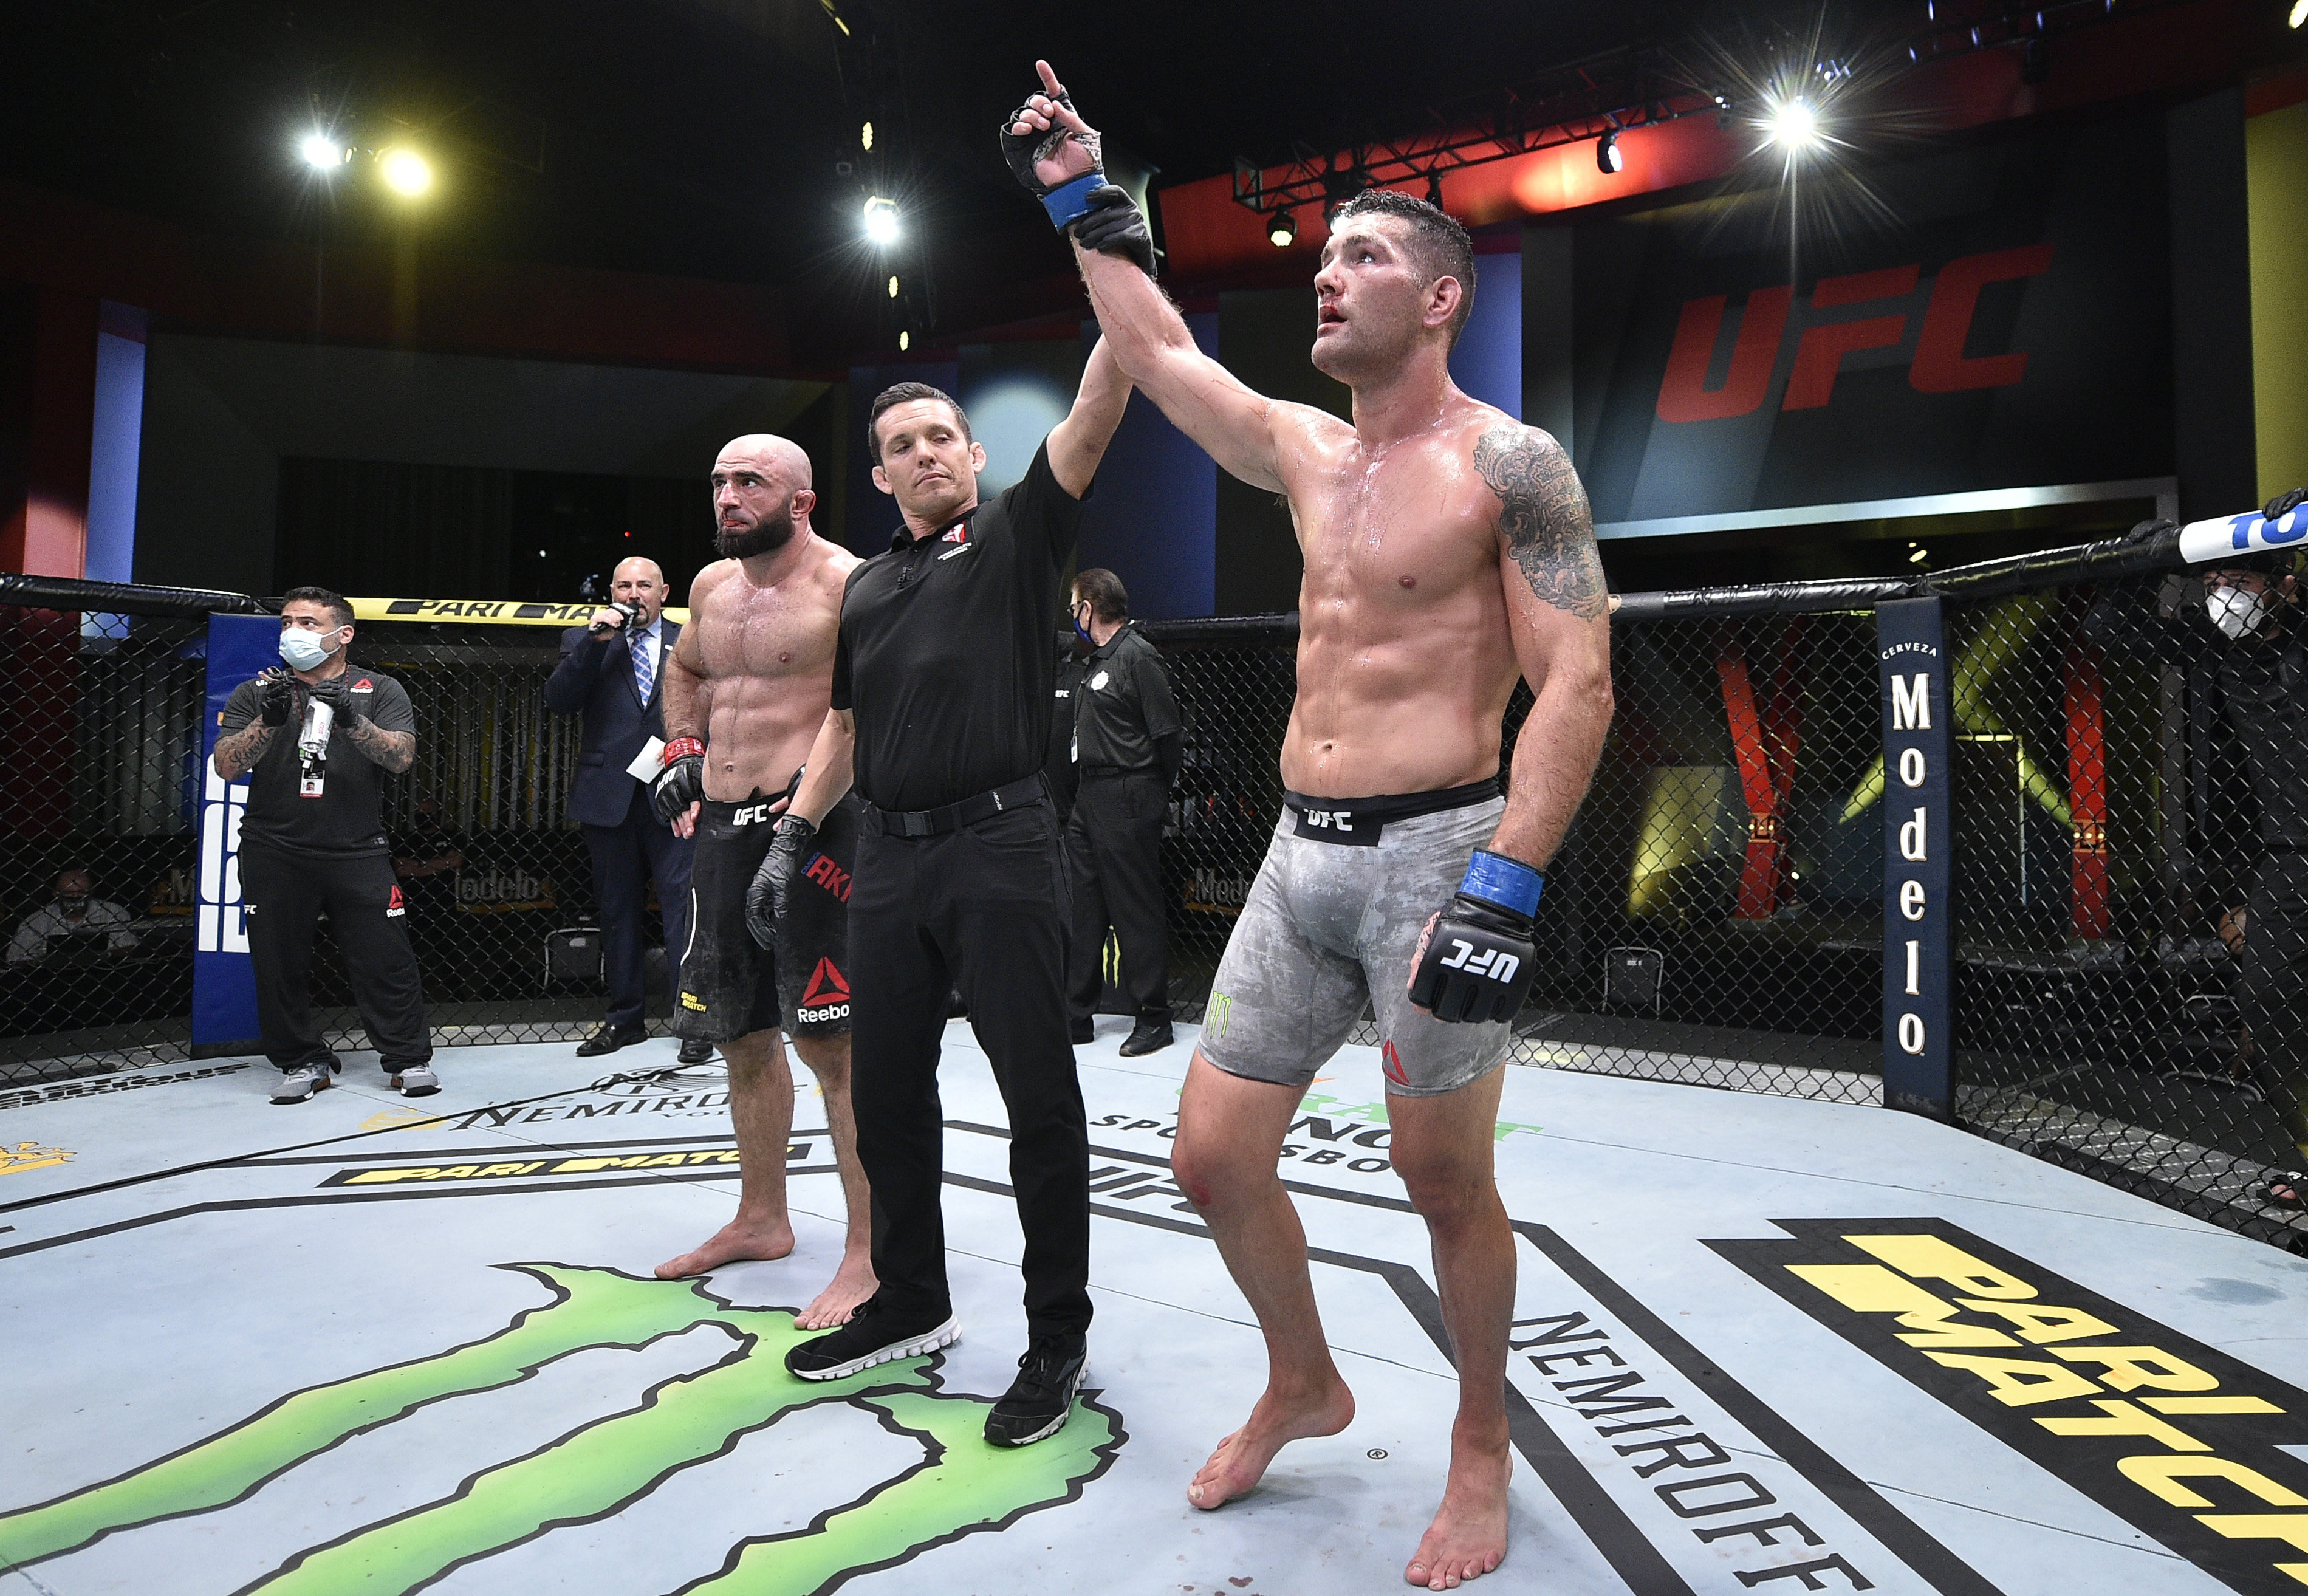 Chris Weidman celebrates after his victory over Omari Akhmedov in their middleweight bout during the UFC Fight Night event on August 8, 2020 in Las Vegas, Nevada. Photo: Chris Unger/Zuffa LLC